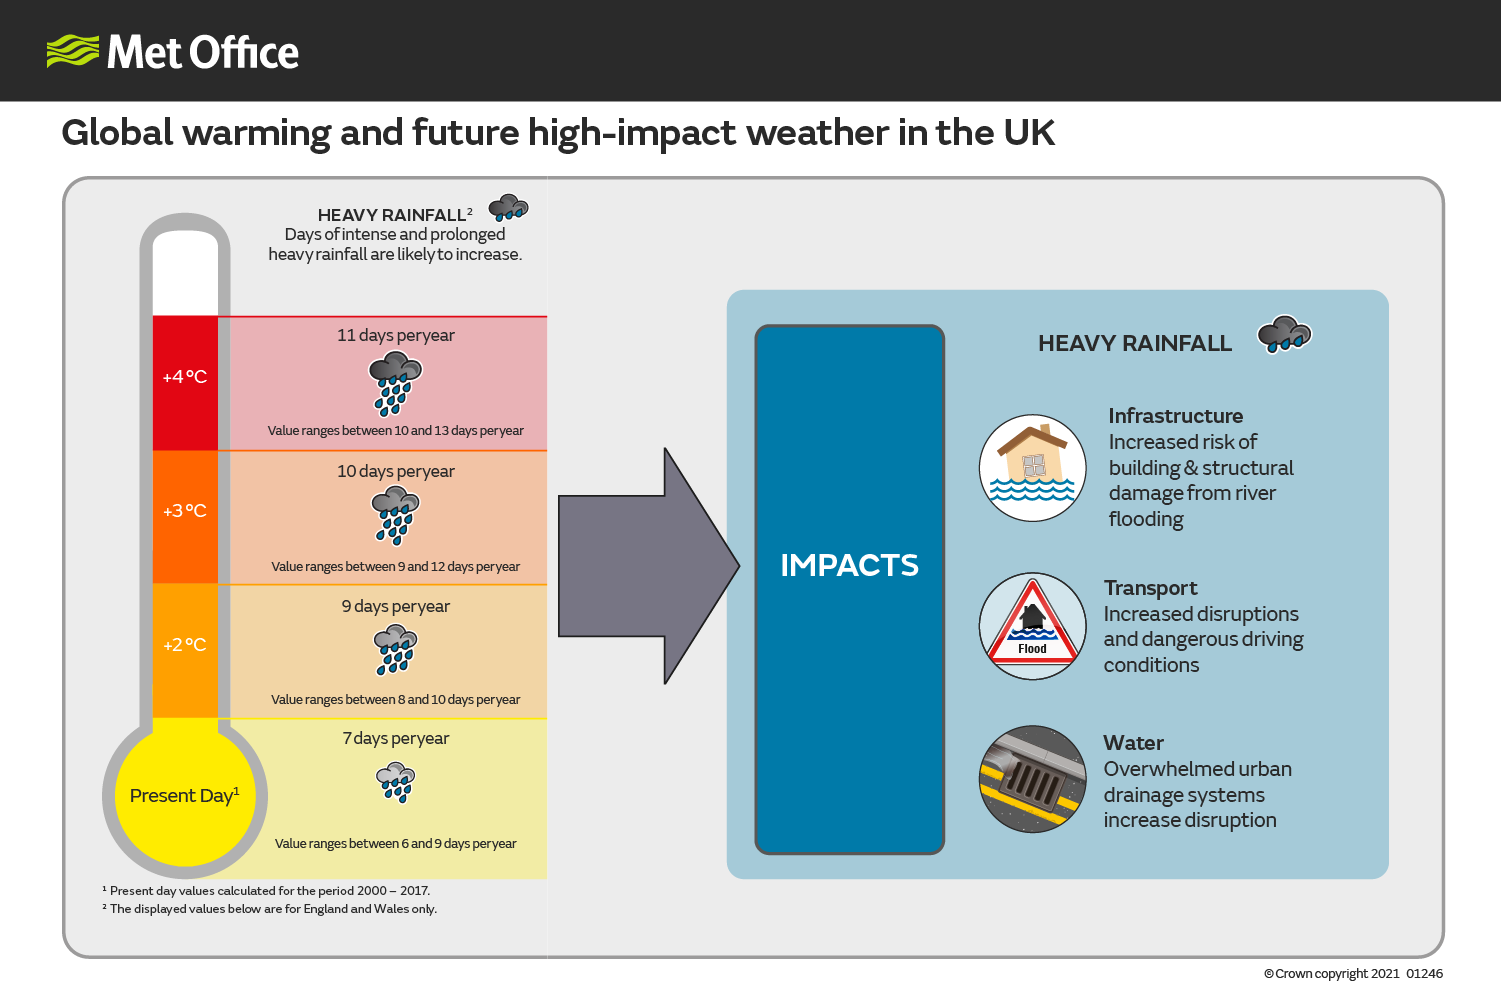 Global warming and future high impact weather in the UK. Days of intense and prolonged rainfall are likely to increase with global warming. In the present day, England and Wales see 7 days of heavy rainfall per year. With a 2 °C increase, this is projected to increase to 9 days; a 3 °C rise projects 10 days; and a 4 °C rise projects 11 days. Heavy rainfall can have impacts on infrastructure, transport and urban drainage systems.